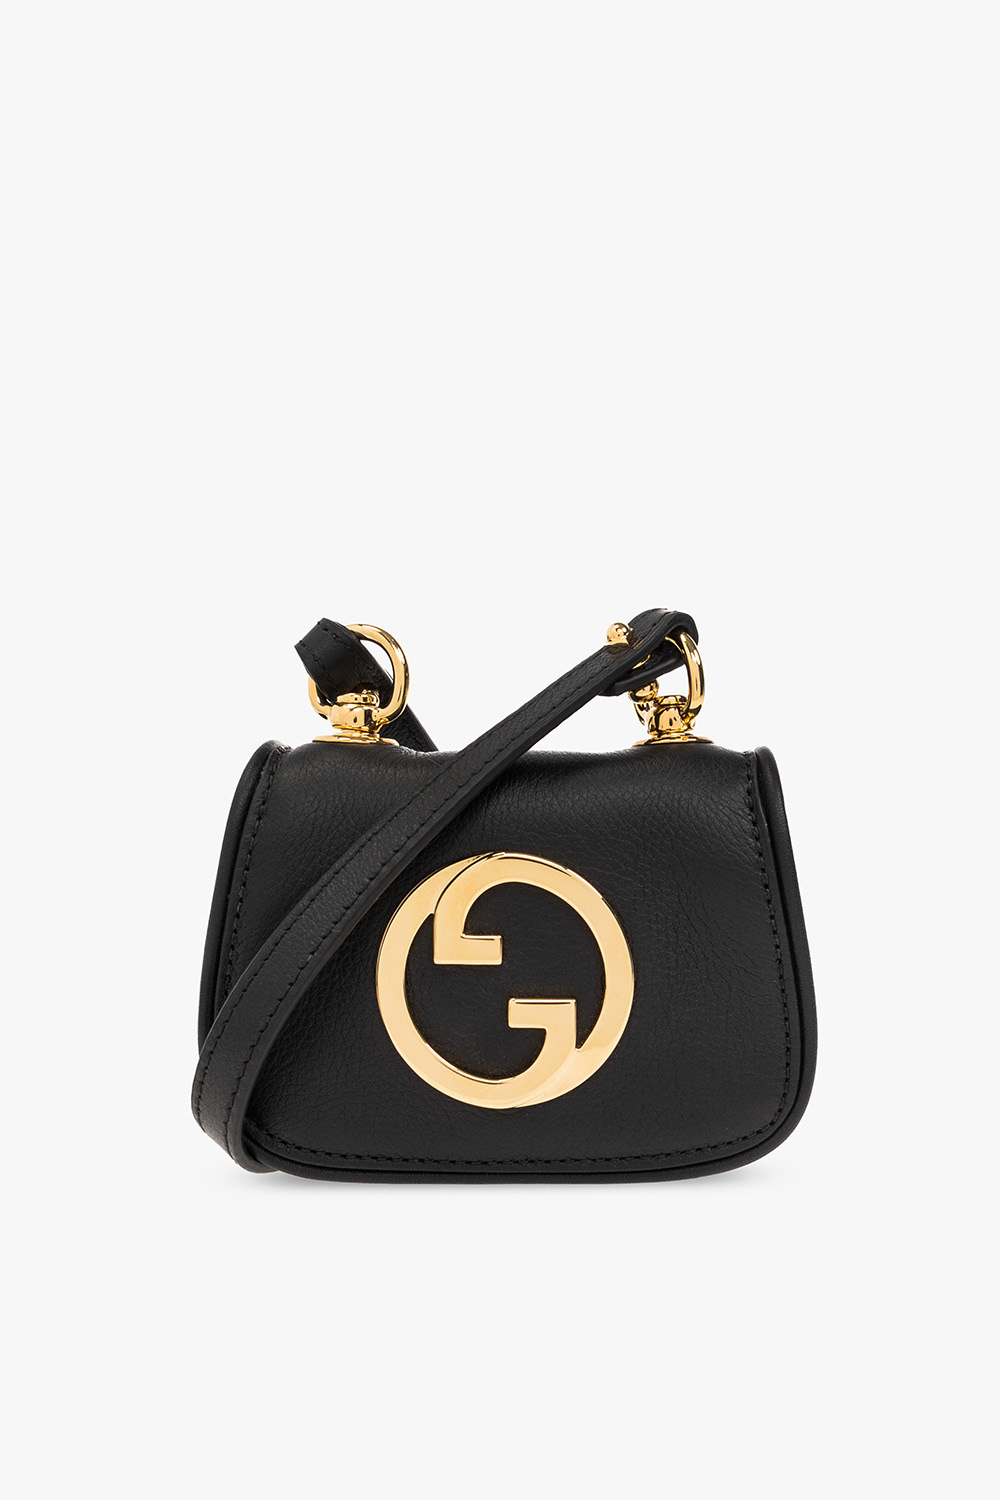 Gucci ‘Blondie’ strapped pouch